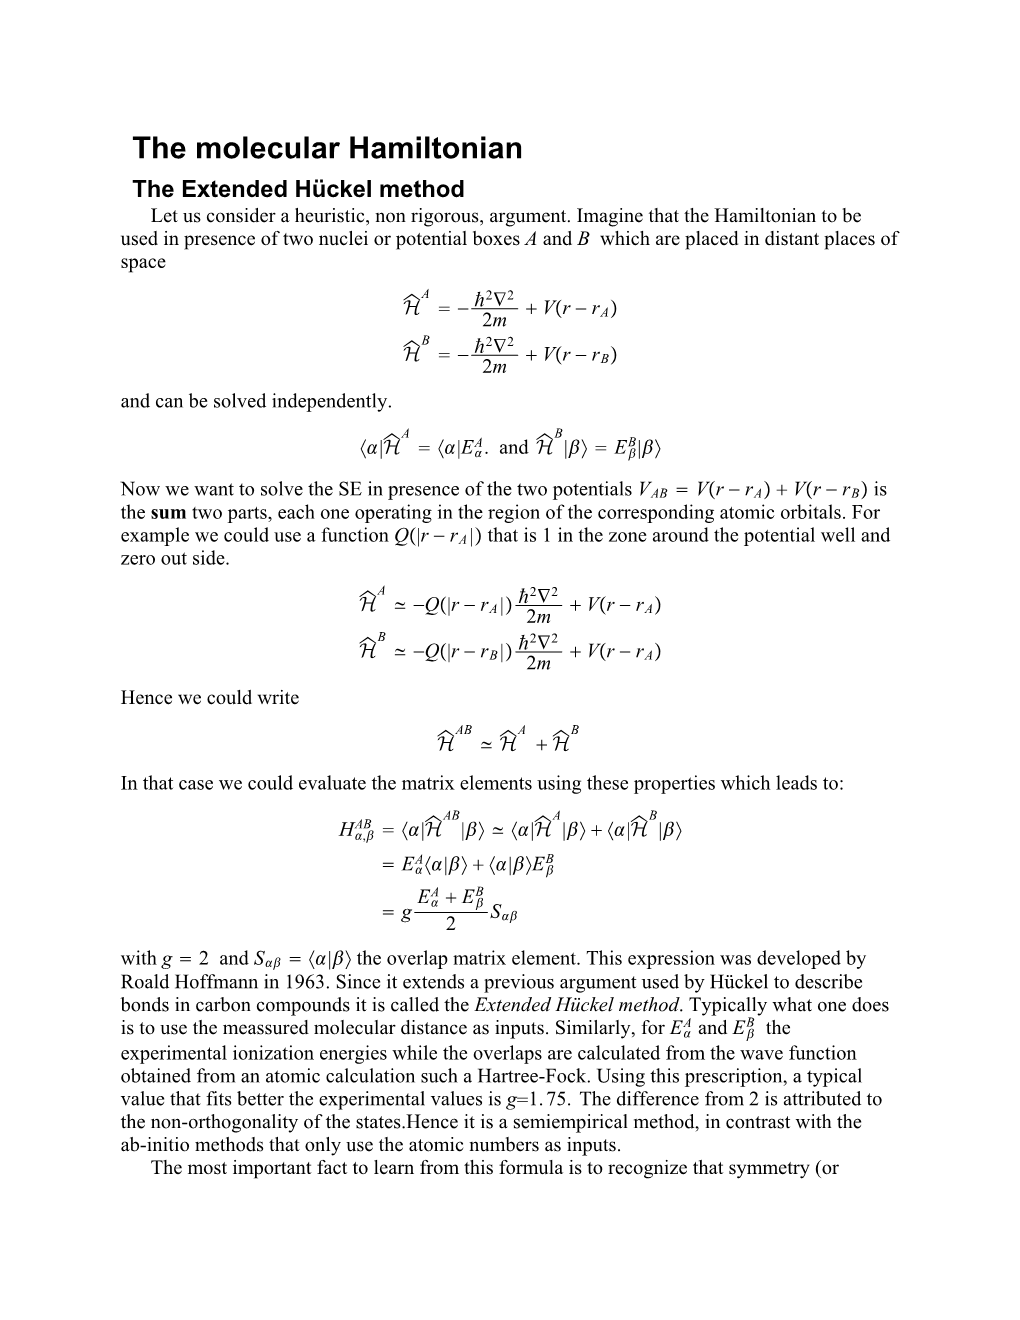 The Molecular Hamiltonian the Extended Hückel Method Let Us Consider a Heuristic, Non Rigorous, Argument